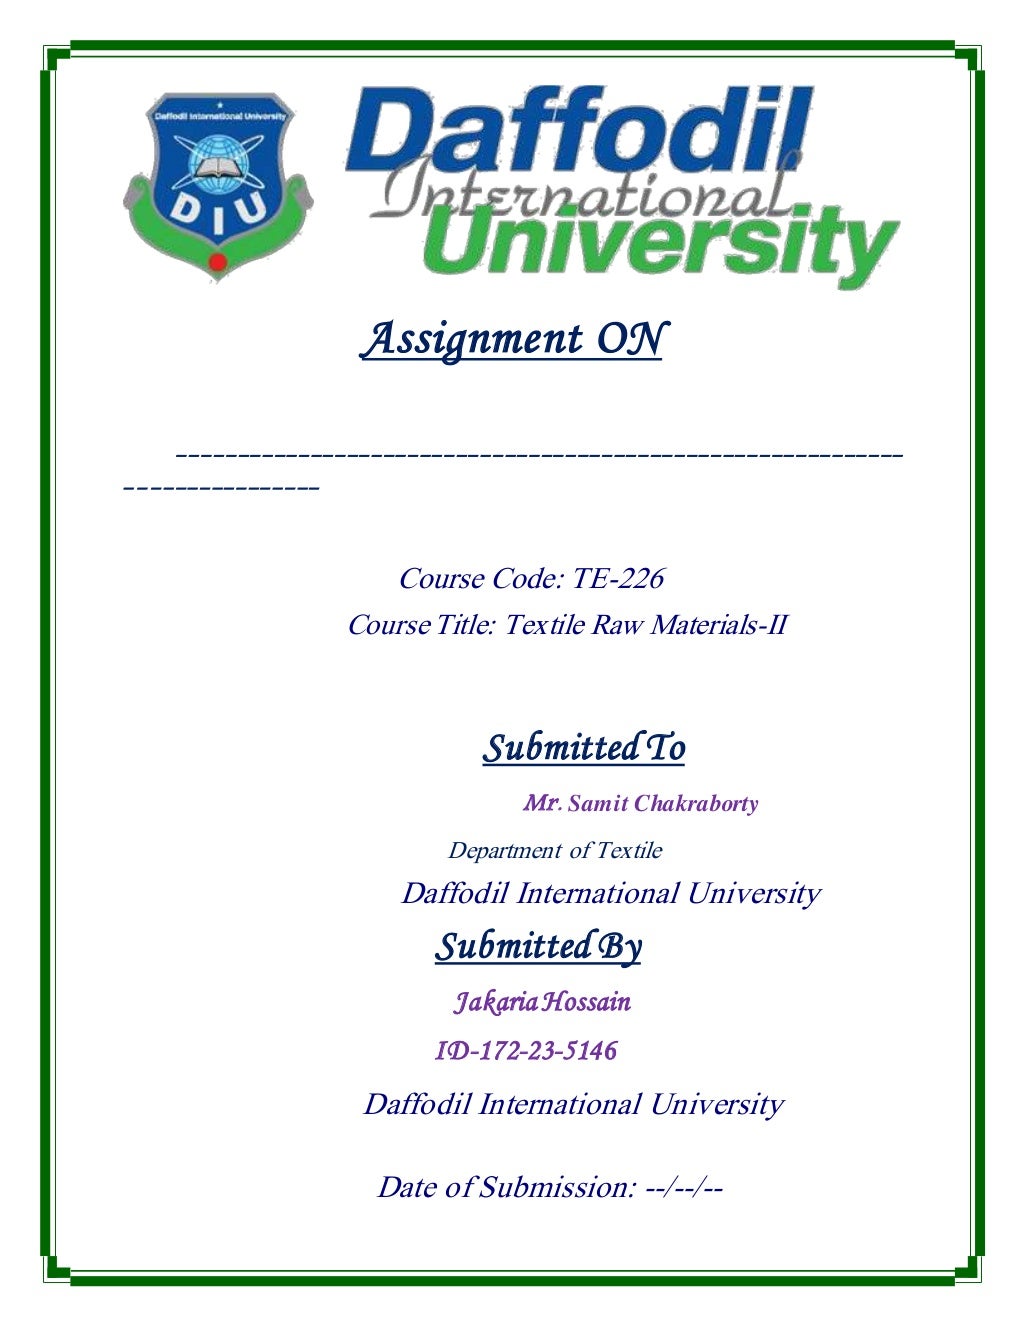 cavendish university assignment cover page